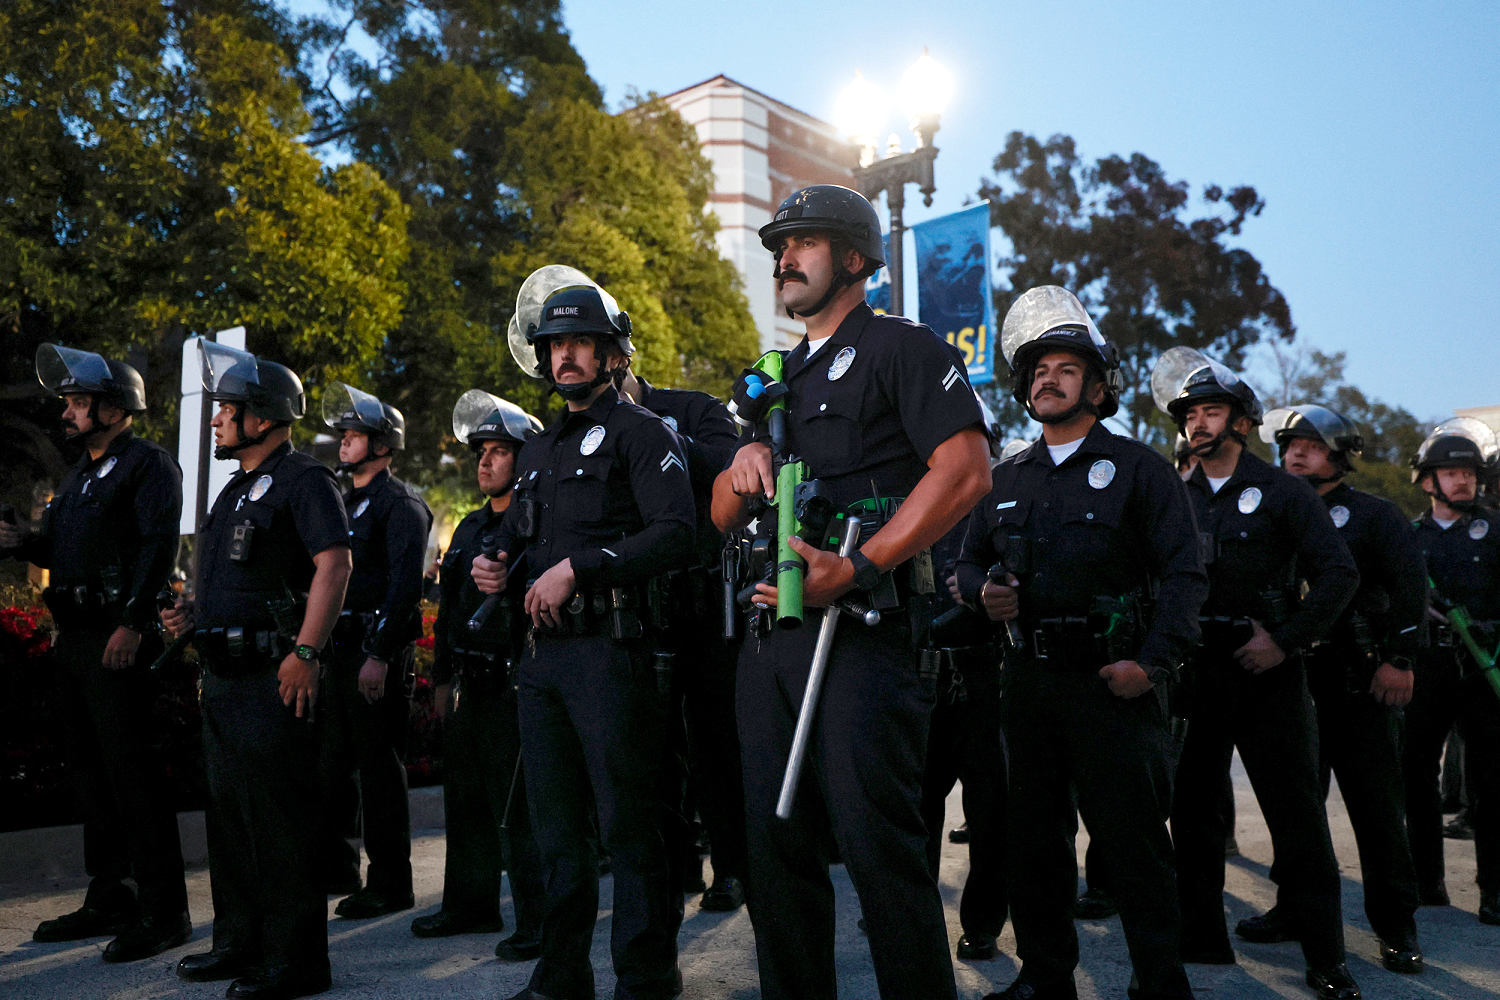 Columbia goes remote for rest of semester; Police issue dispersal order at UCLA